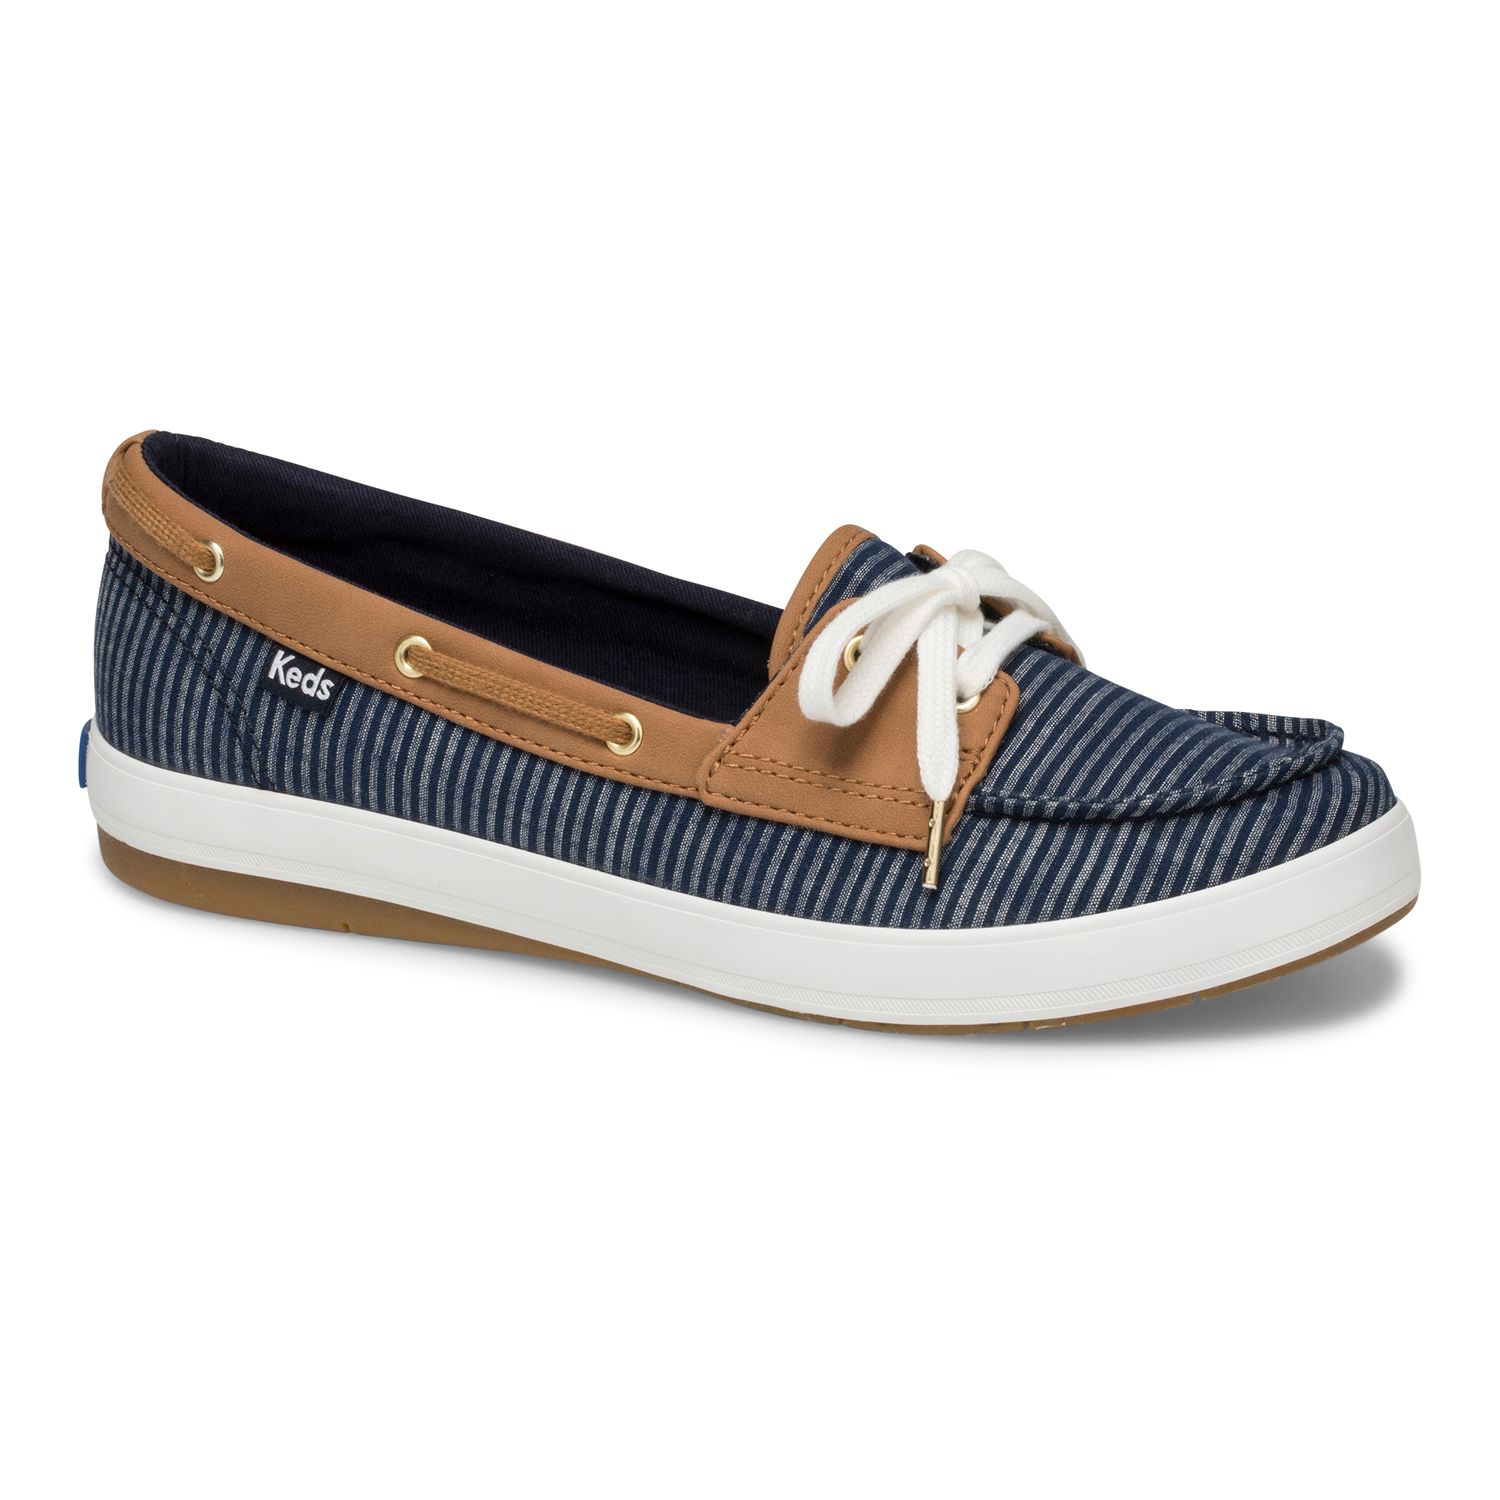 boat shoes womens sale